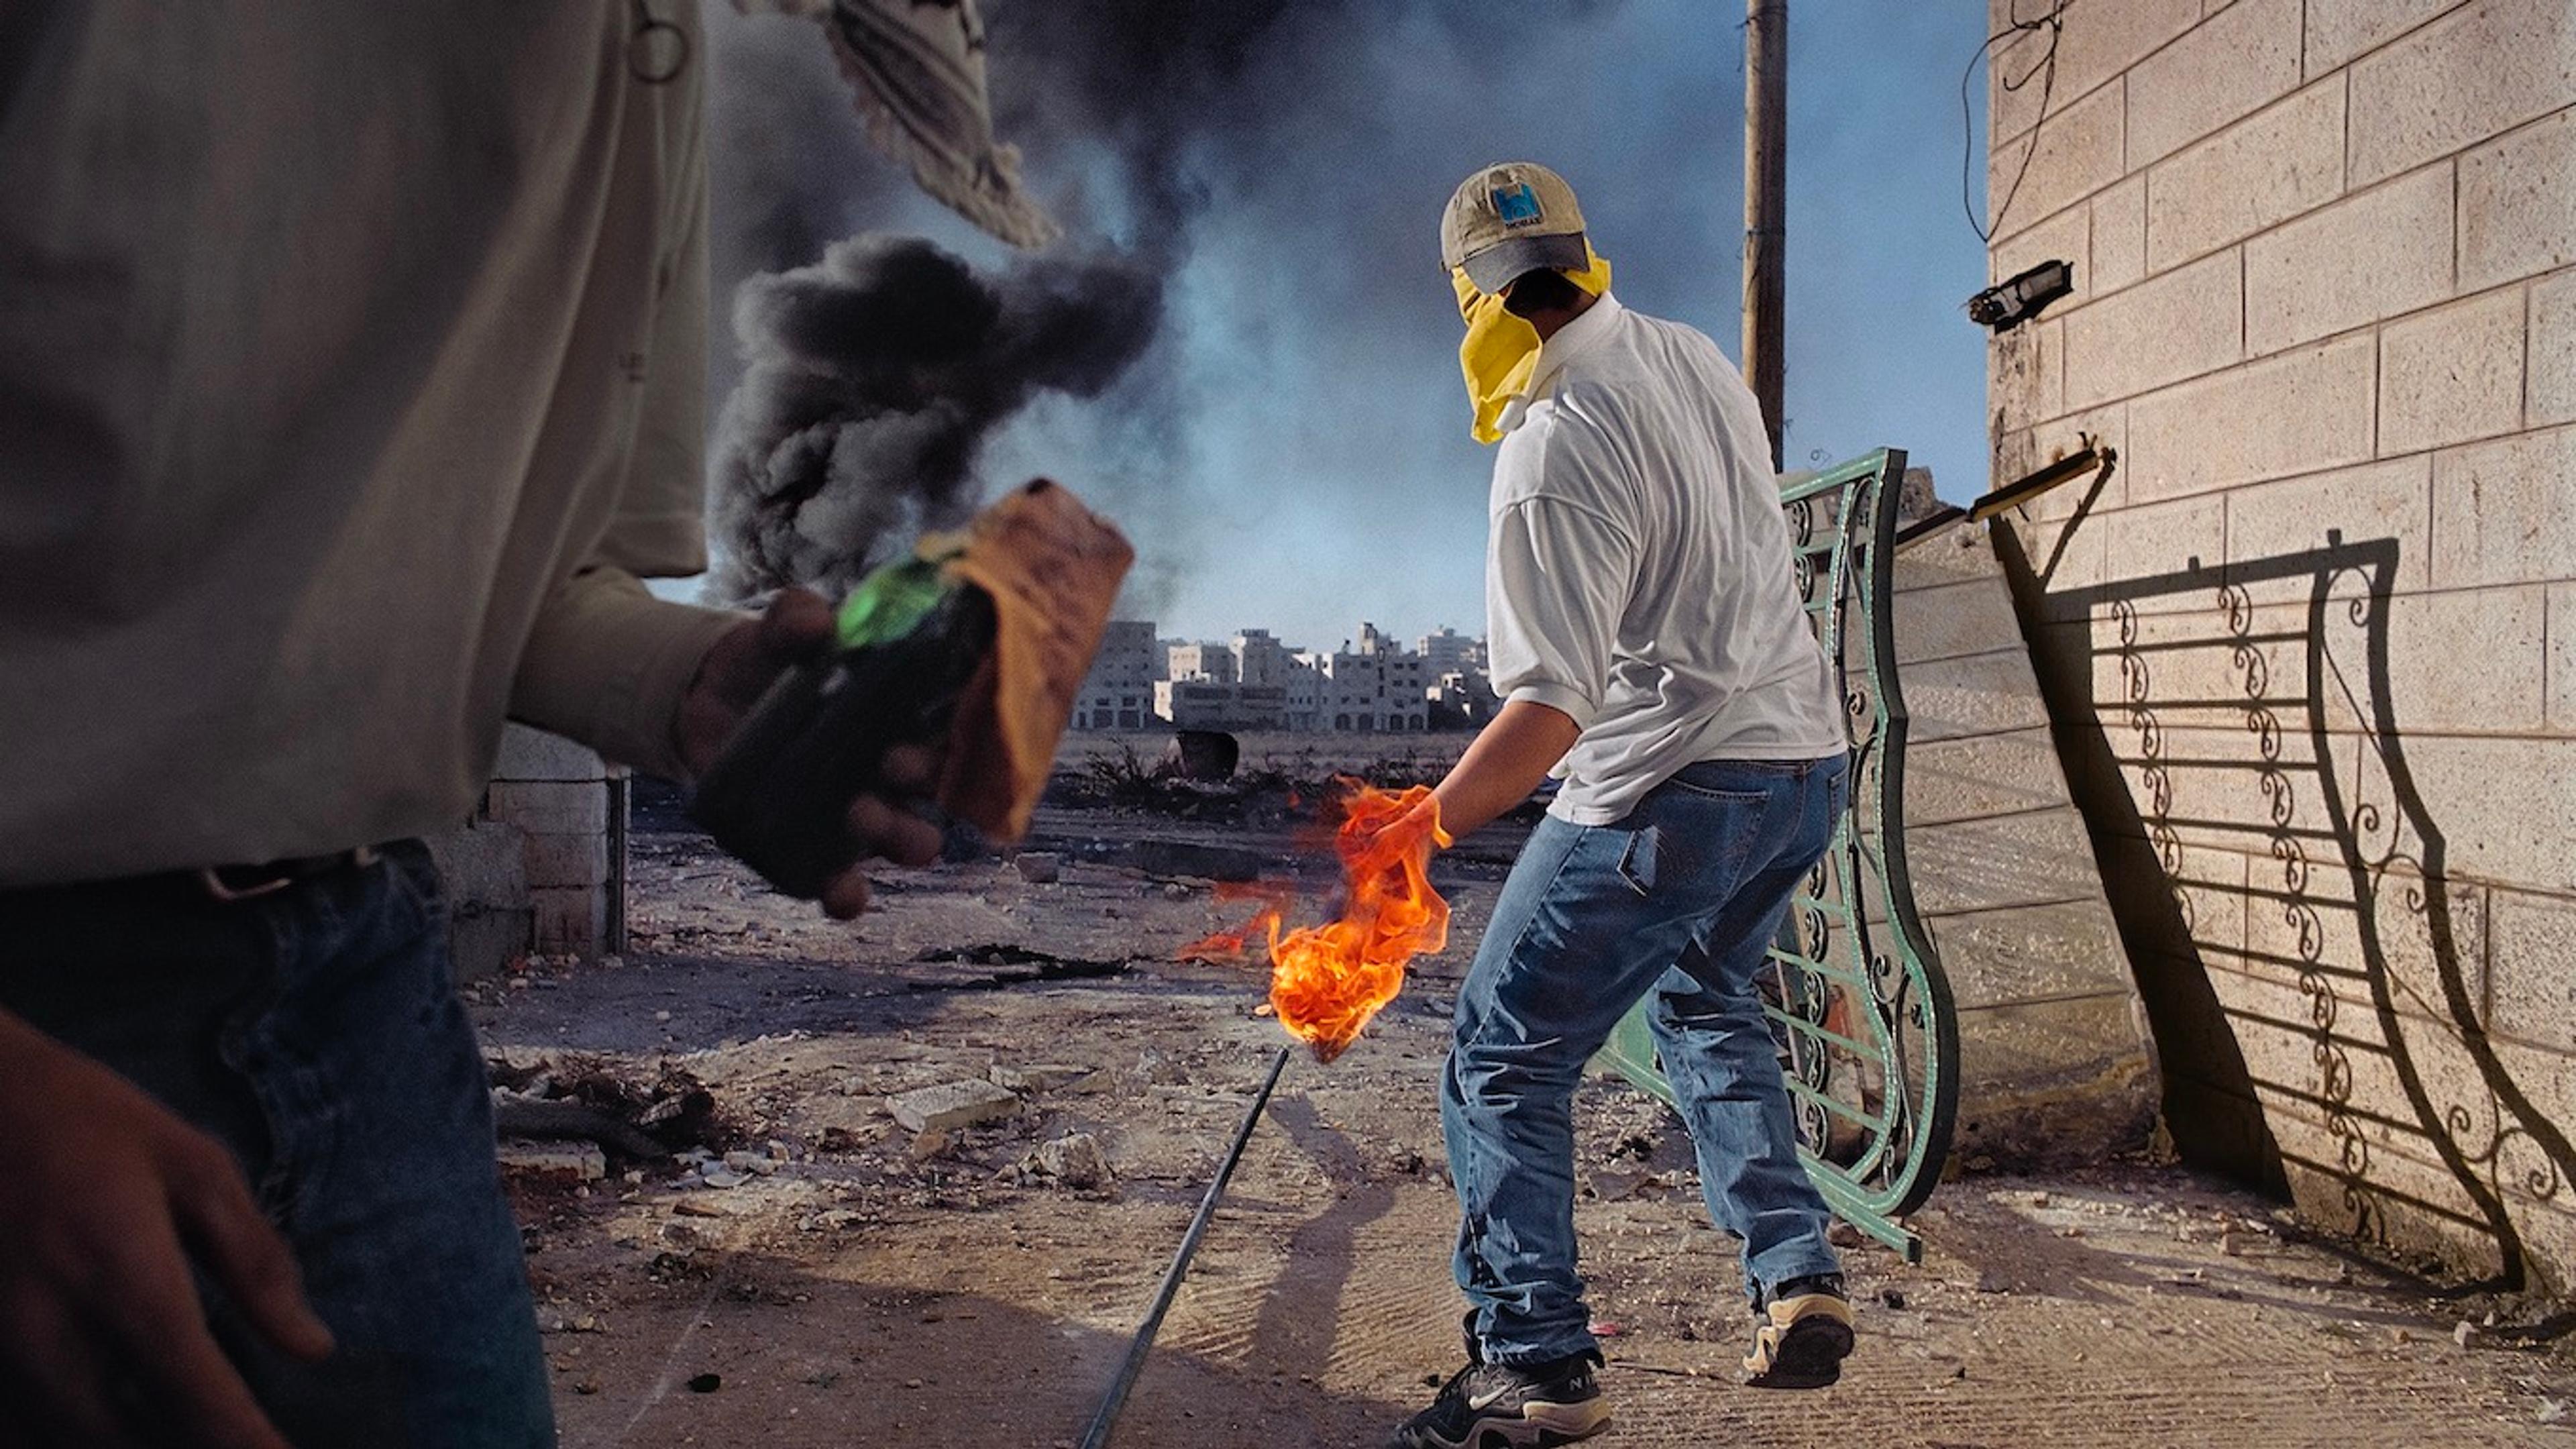 A photographic artwork featuring fire, smoke, and a man in jeans and a white tee shirt